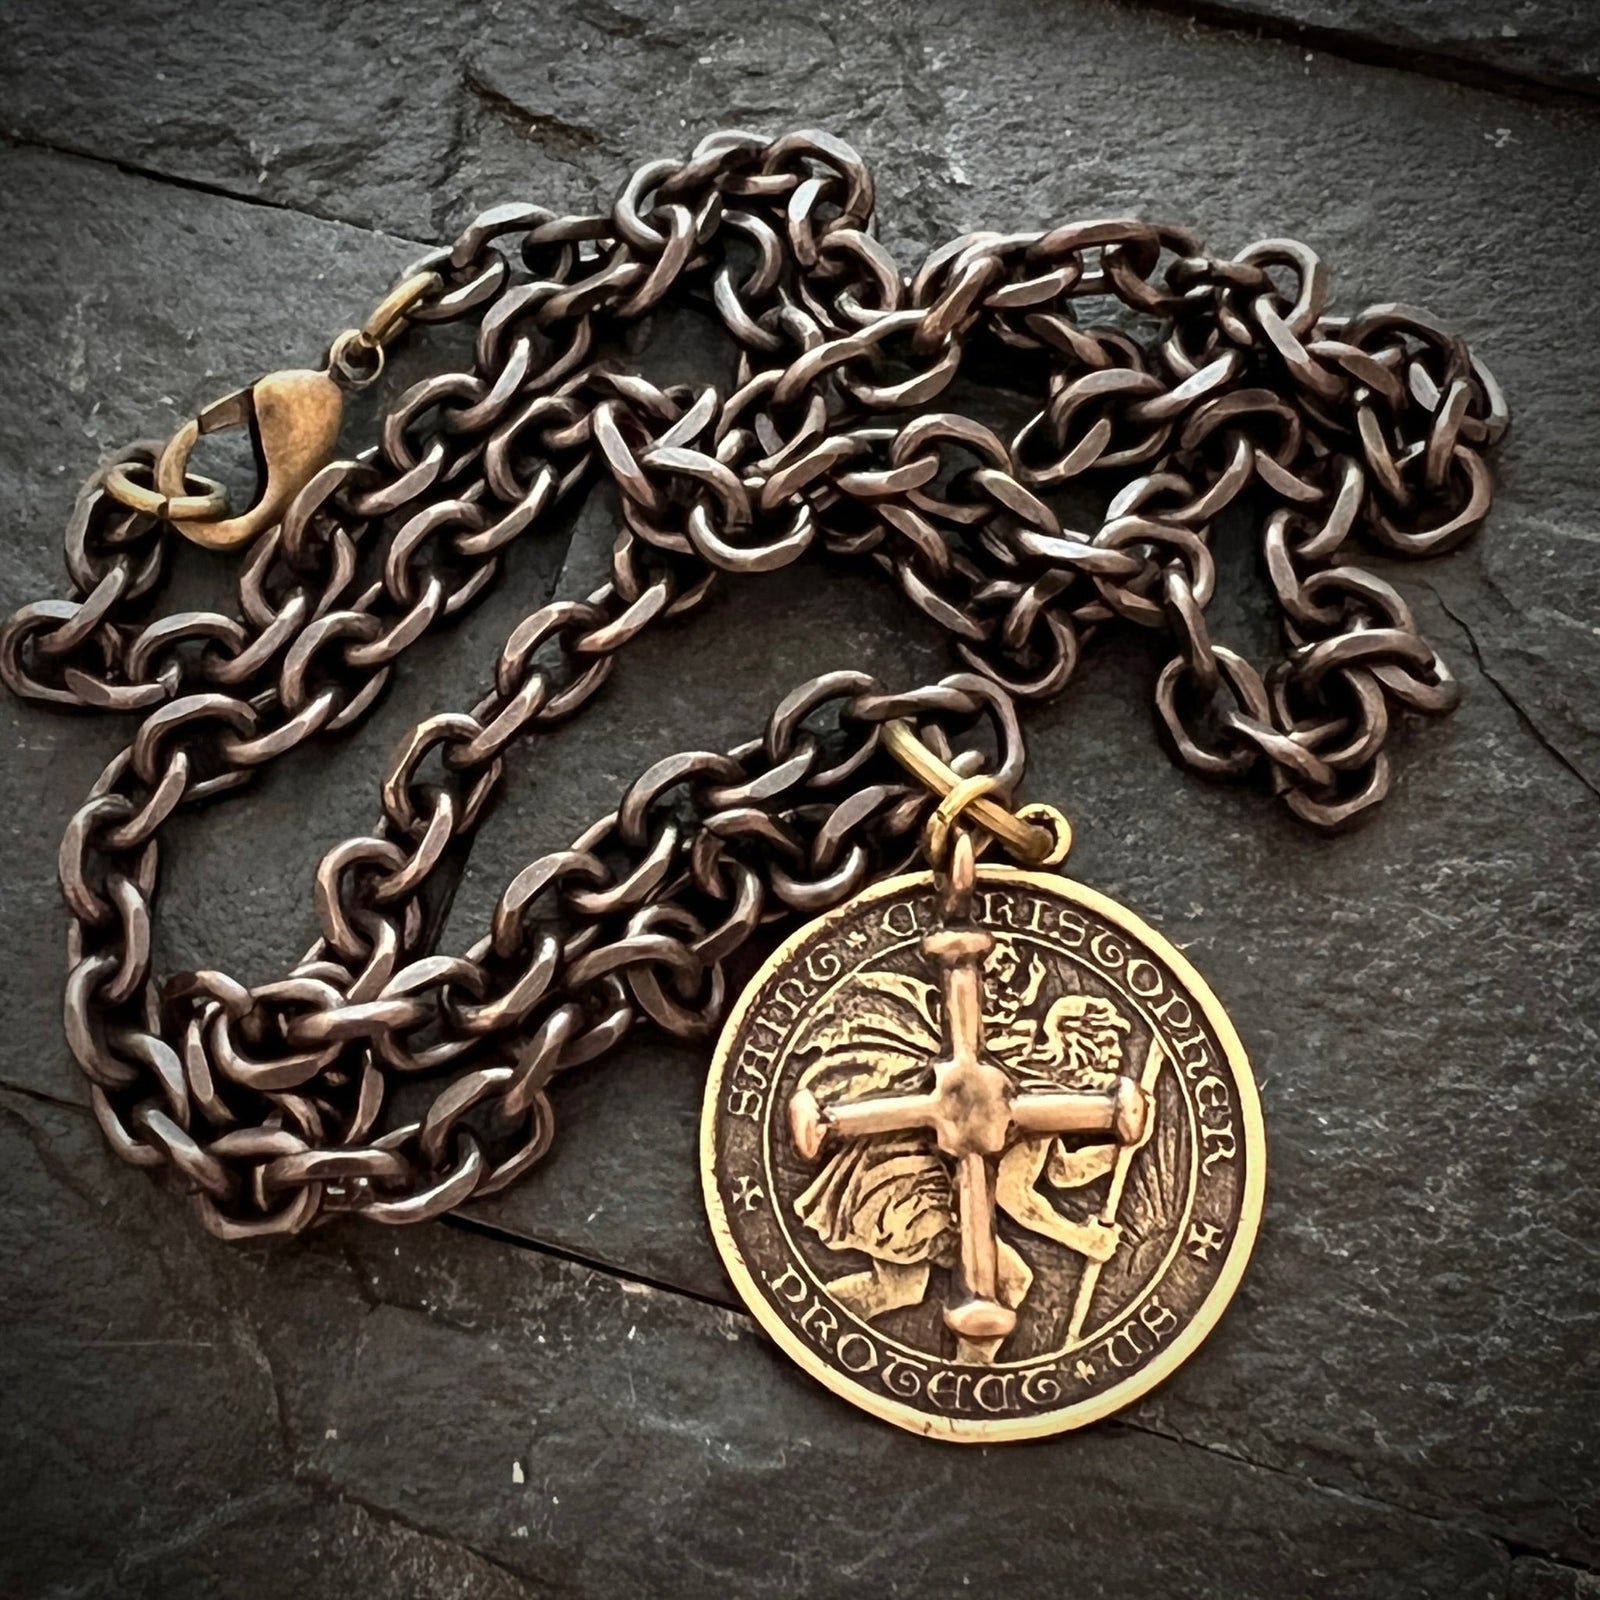 St. Christopher and Cross Antiqued Brass Men's Necklace, Johnny LTD Vintage Catholic Medal and Ancient Cross, Unisex Necklace, BR-025-20